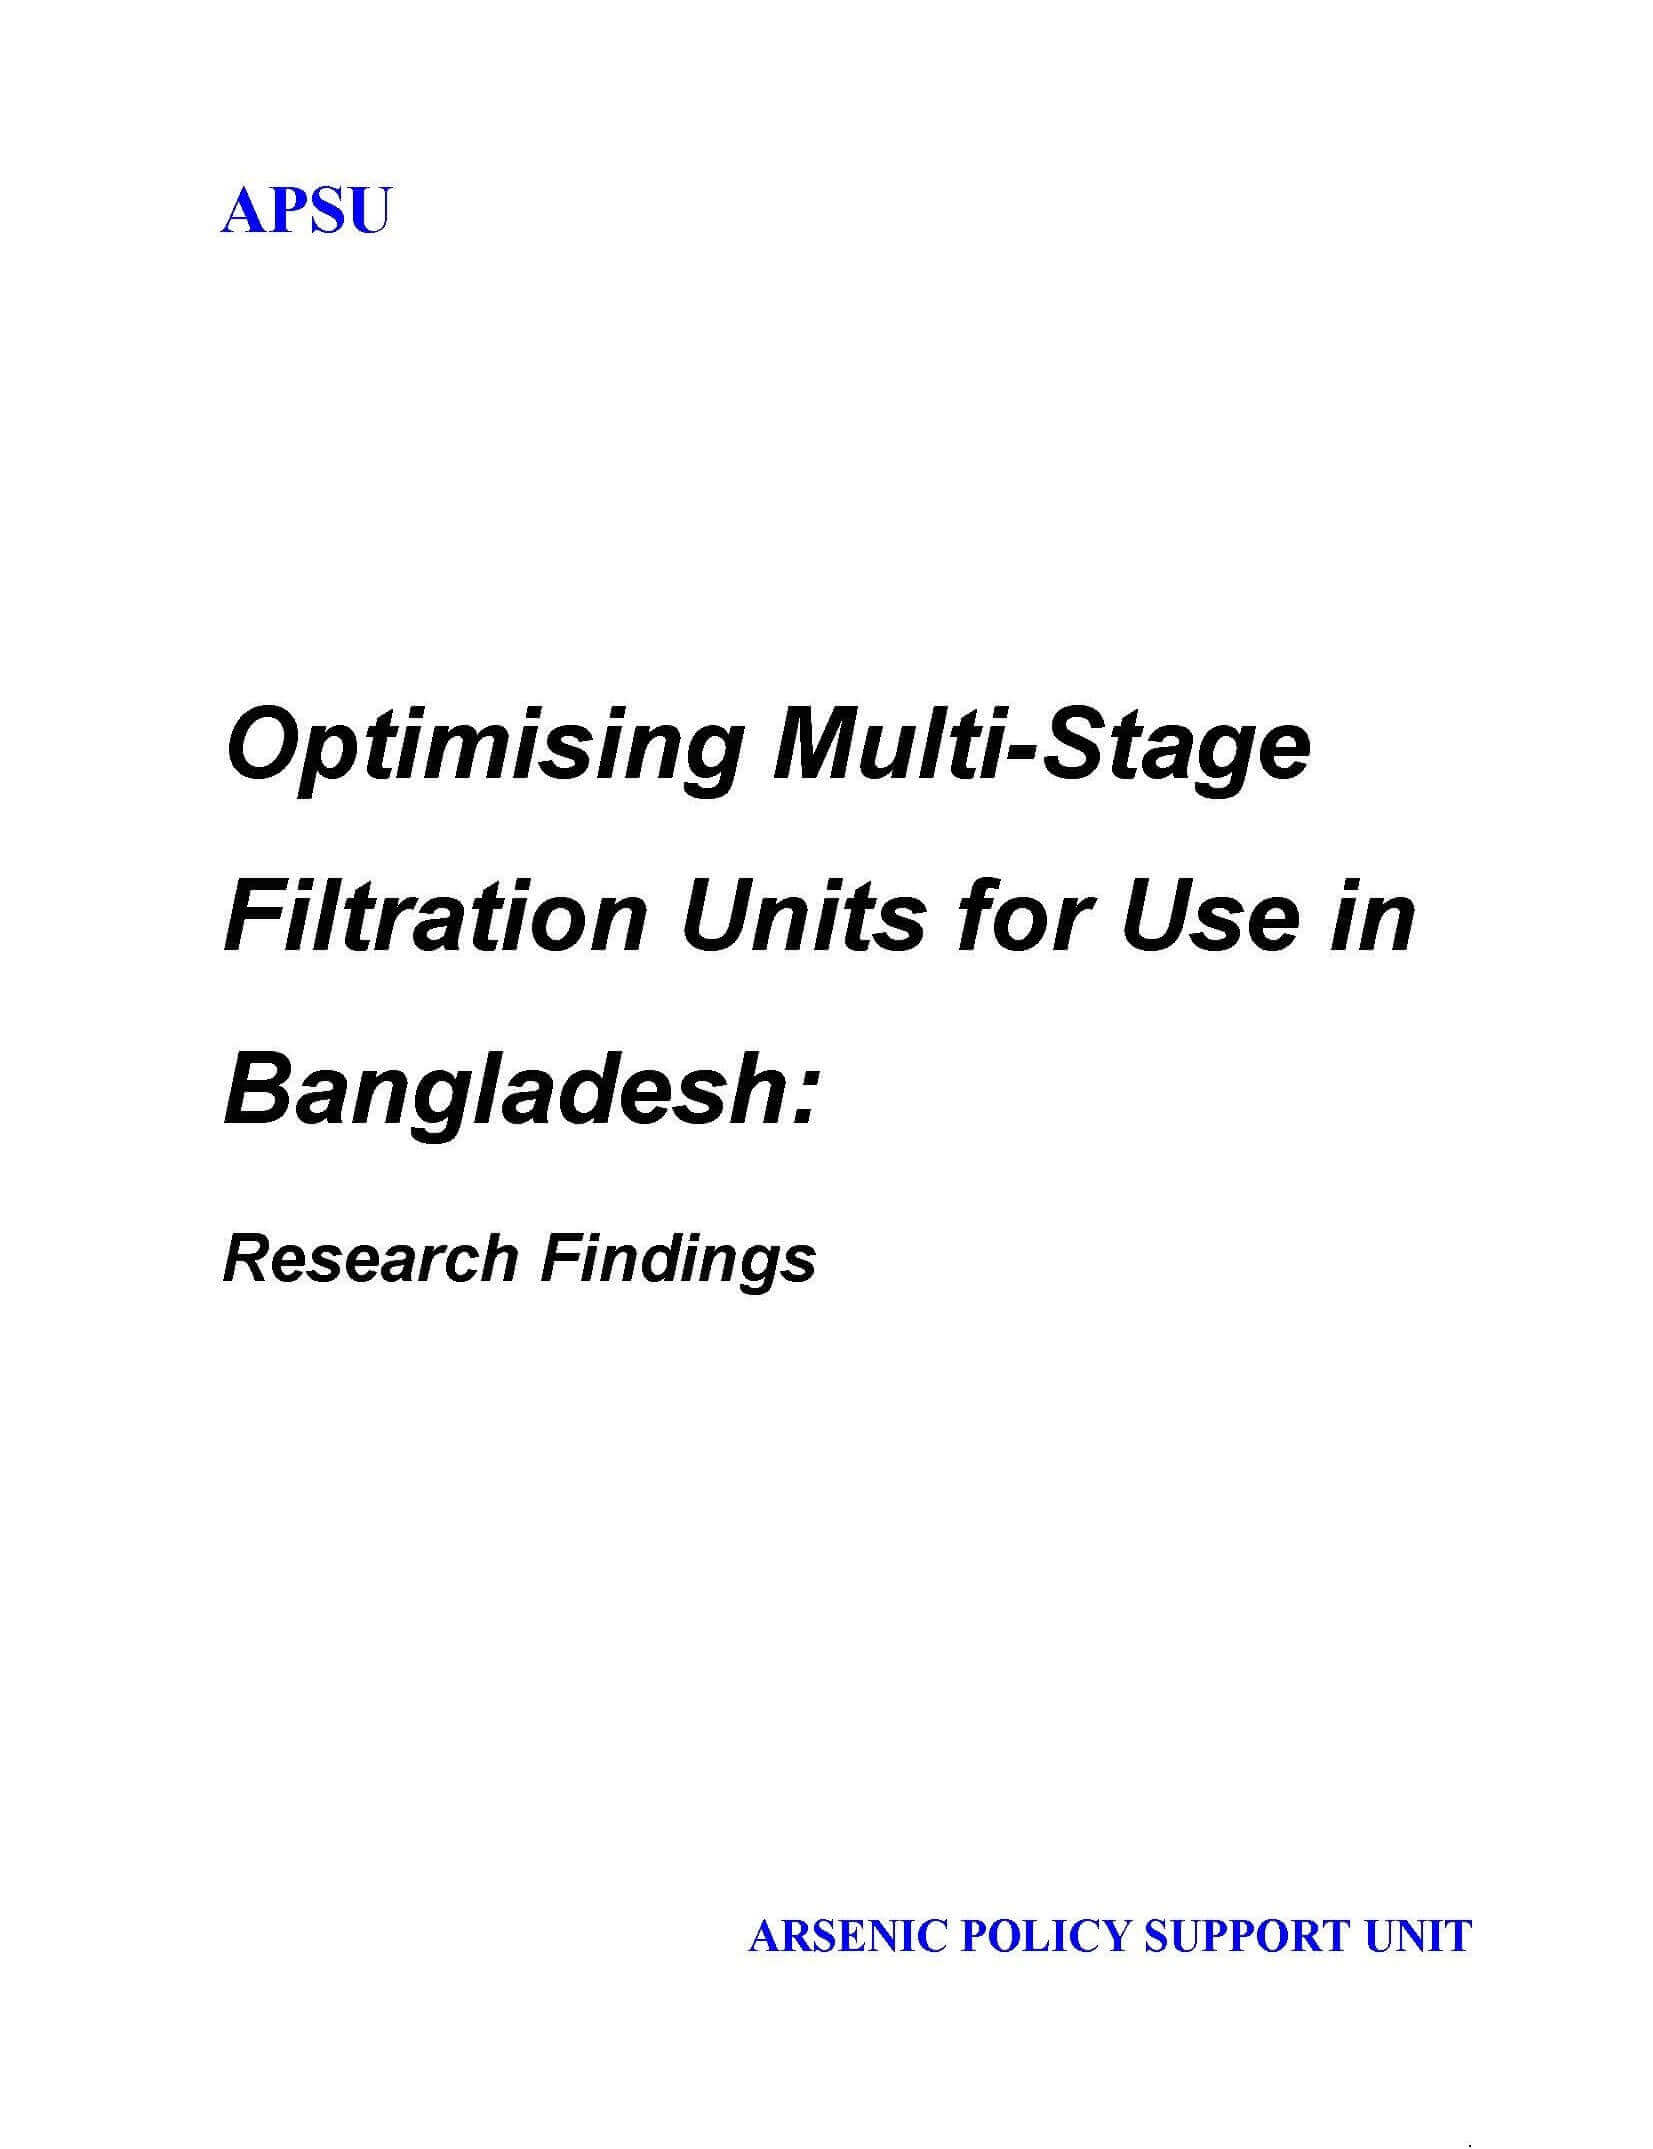 Optimising Multi-Stage Filtration Units for Use in Bangladesh